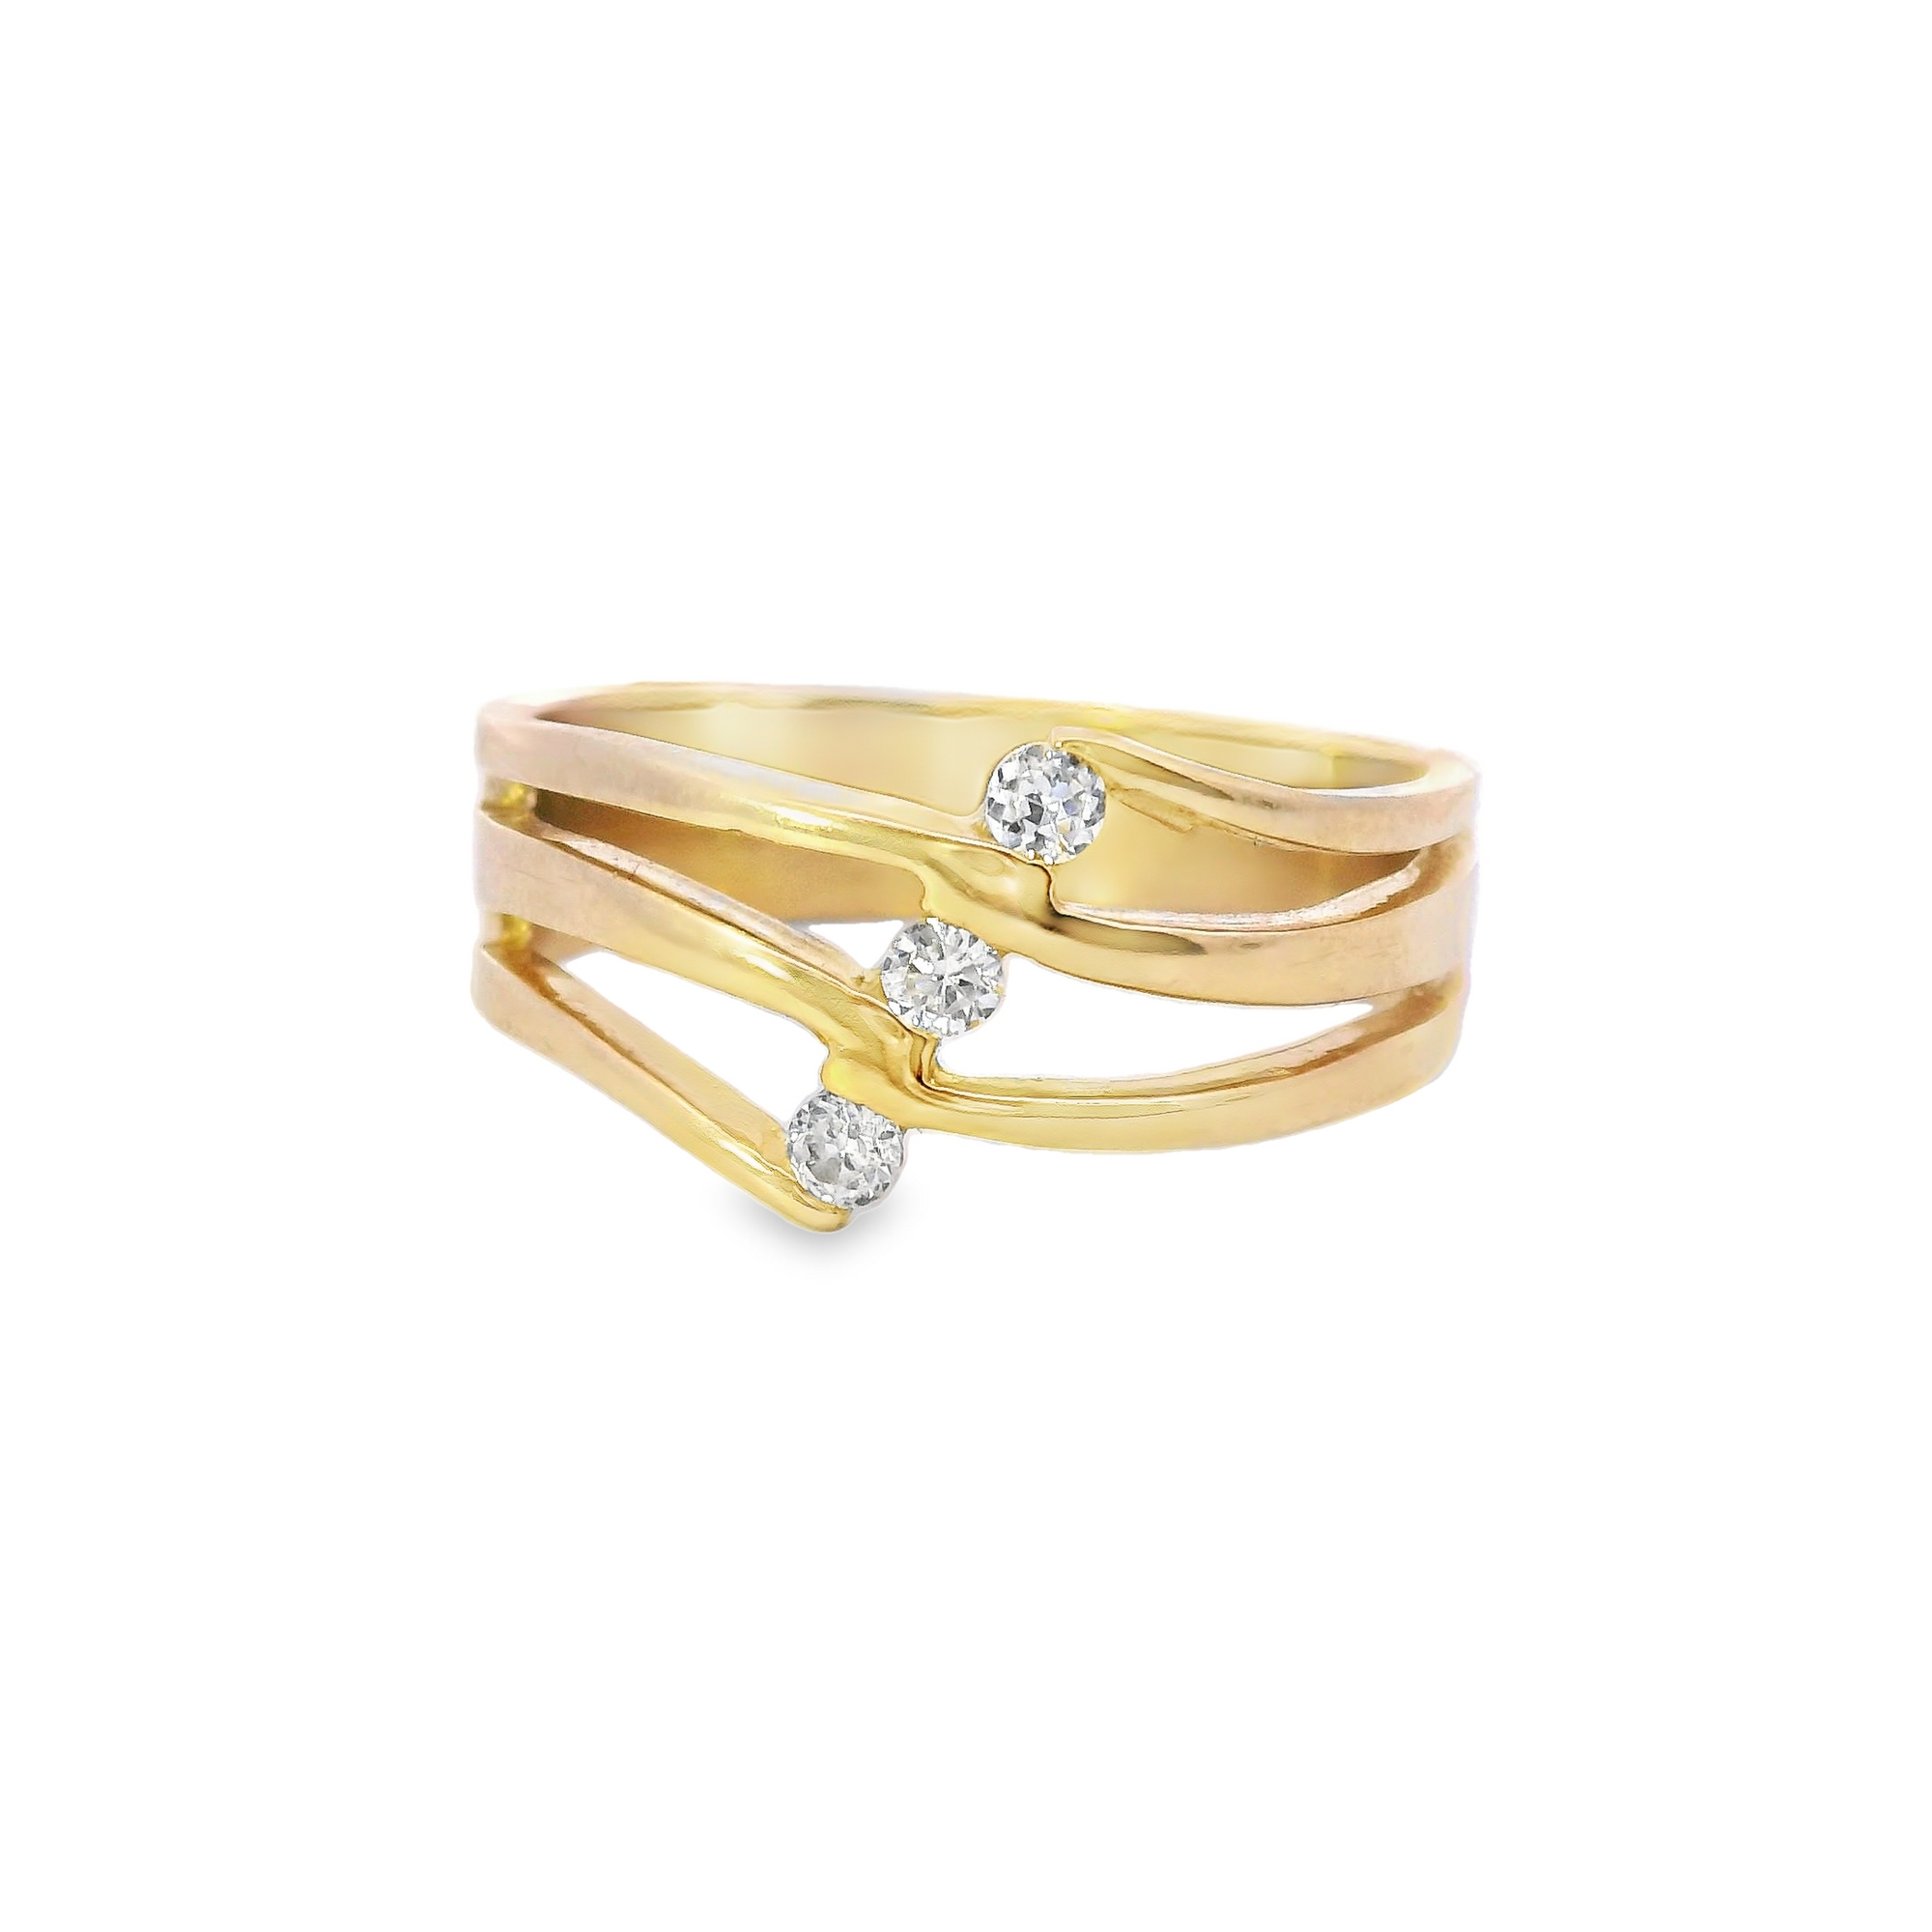 10K Real Gold 3 Band 3 CZ Stone Fancy Ring for Women